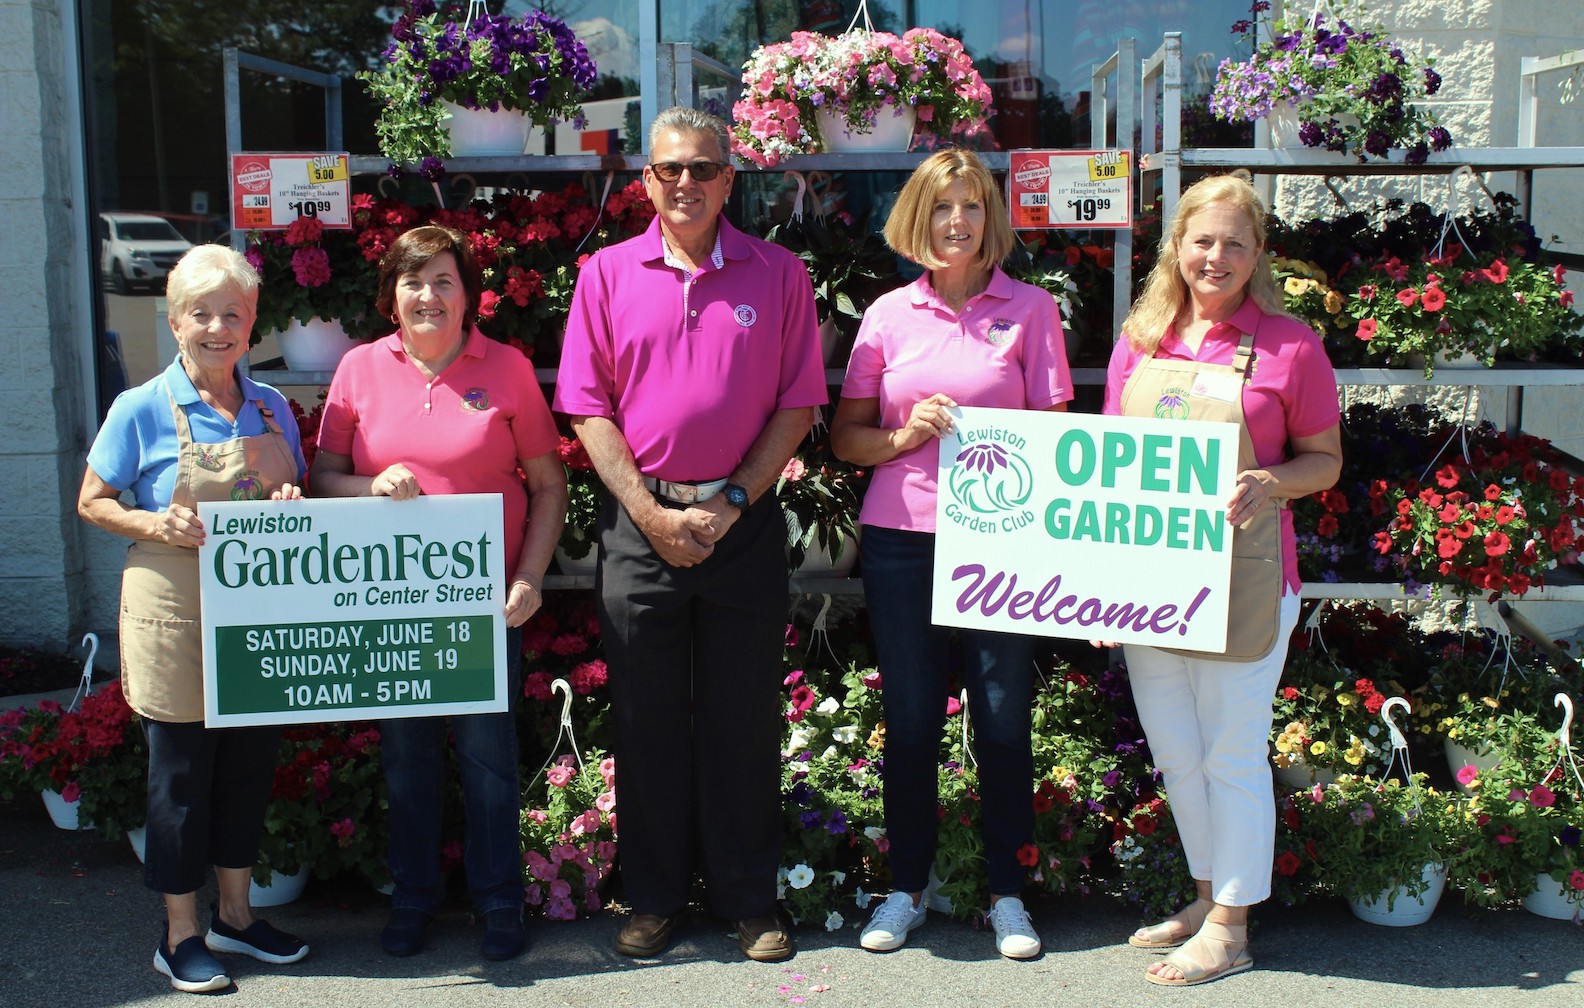 DiMino Tops Lewiston is sponsoring the open gardens portion of GardenFest. Shown in the picture, from left: Barbara Carter, Sharon Low, Anthony DiMino, Judy Talarico and Susan Hofert. (Photo by Robert Albee)